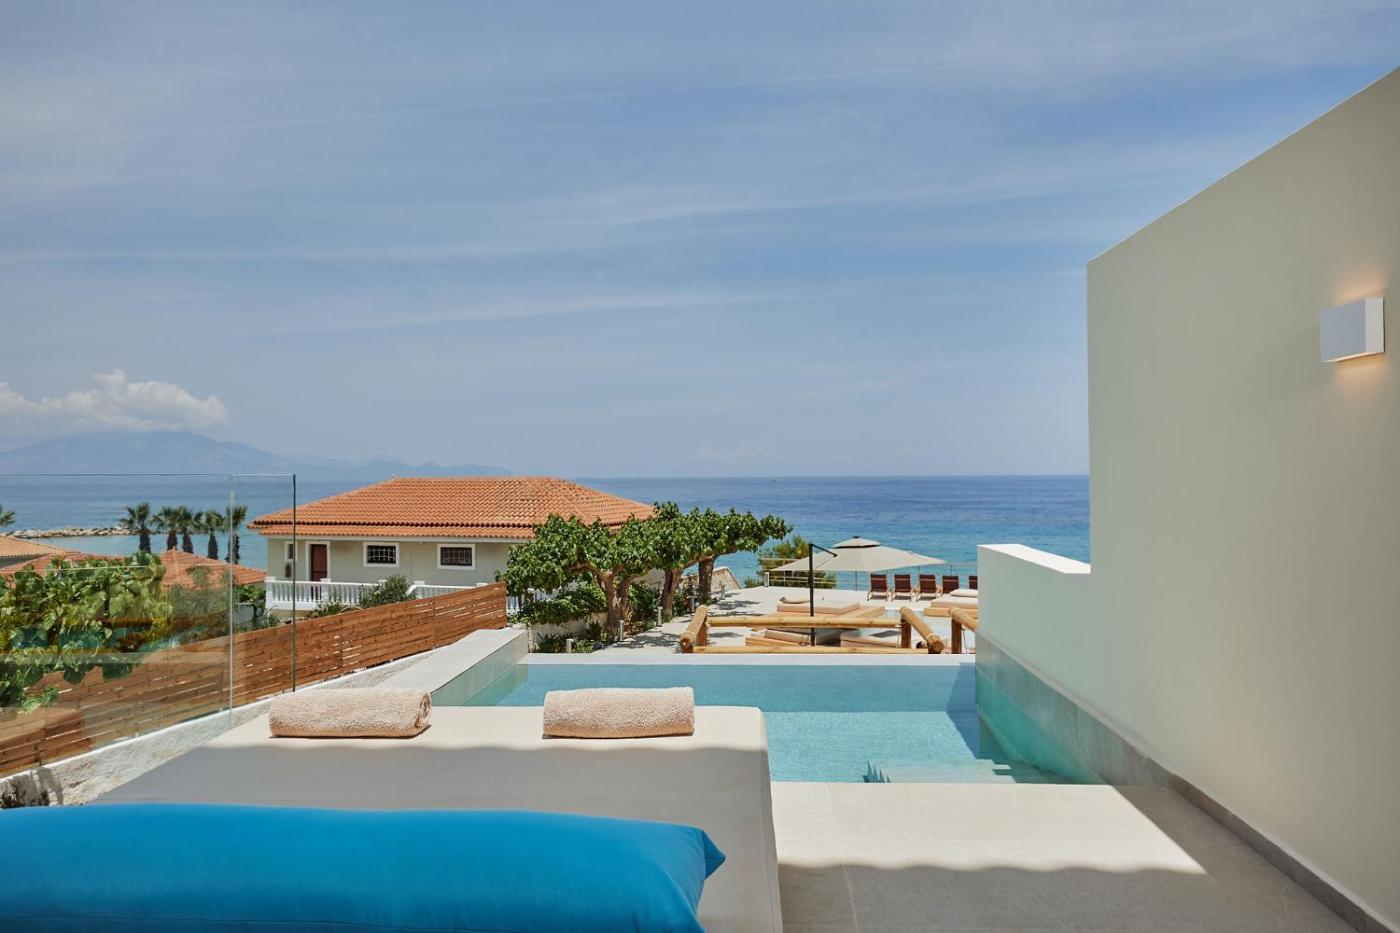 Hotel with private pool - Tsamis Zante Suites